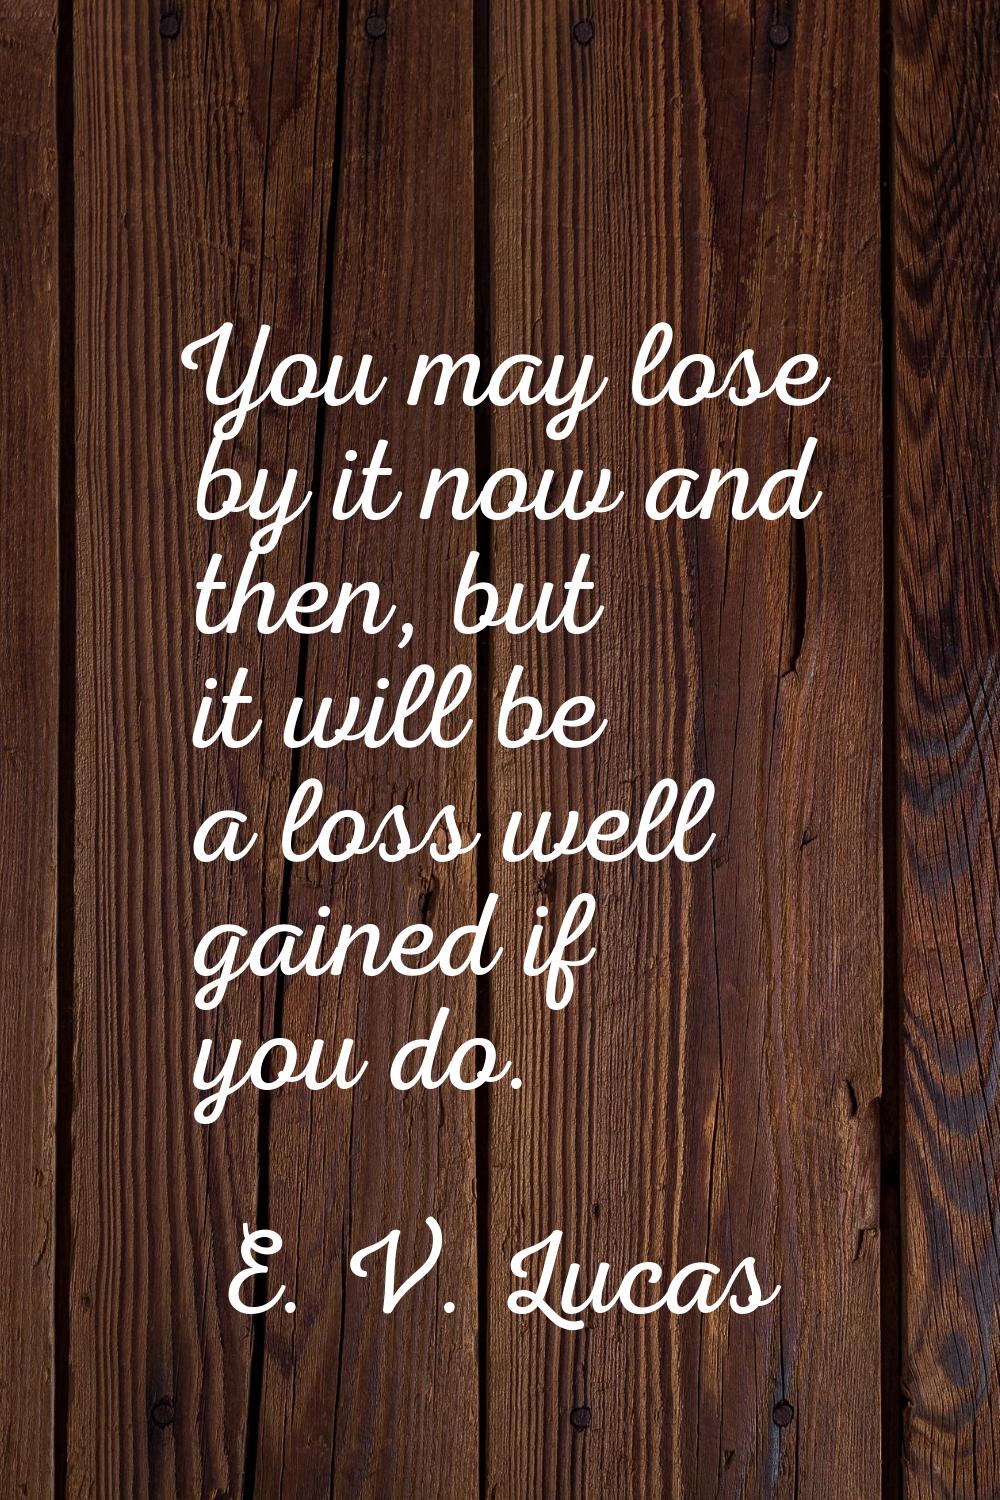 You may lose by it now and then, but it will be a loss well gained if you do.